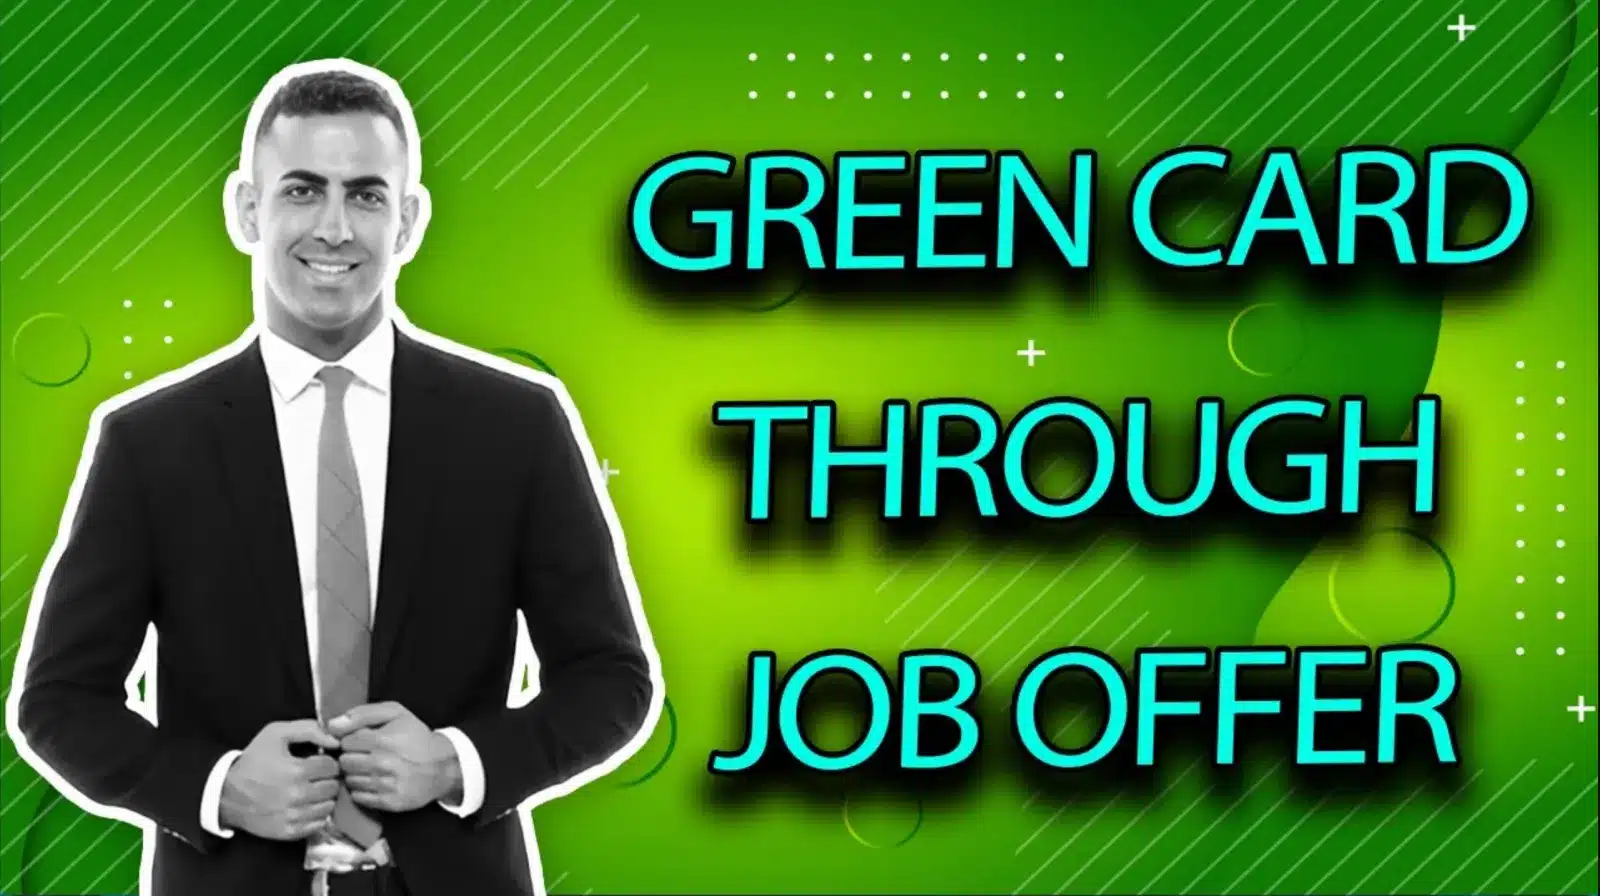 How to Get Green Card with Job Offer - Process Explained